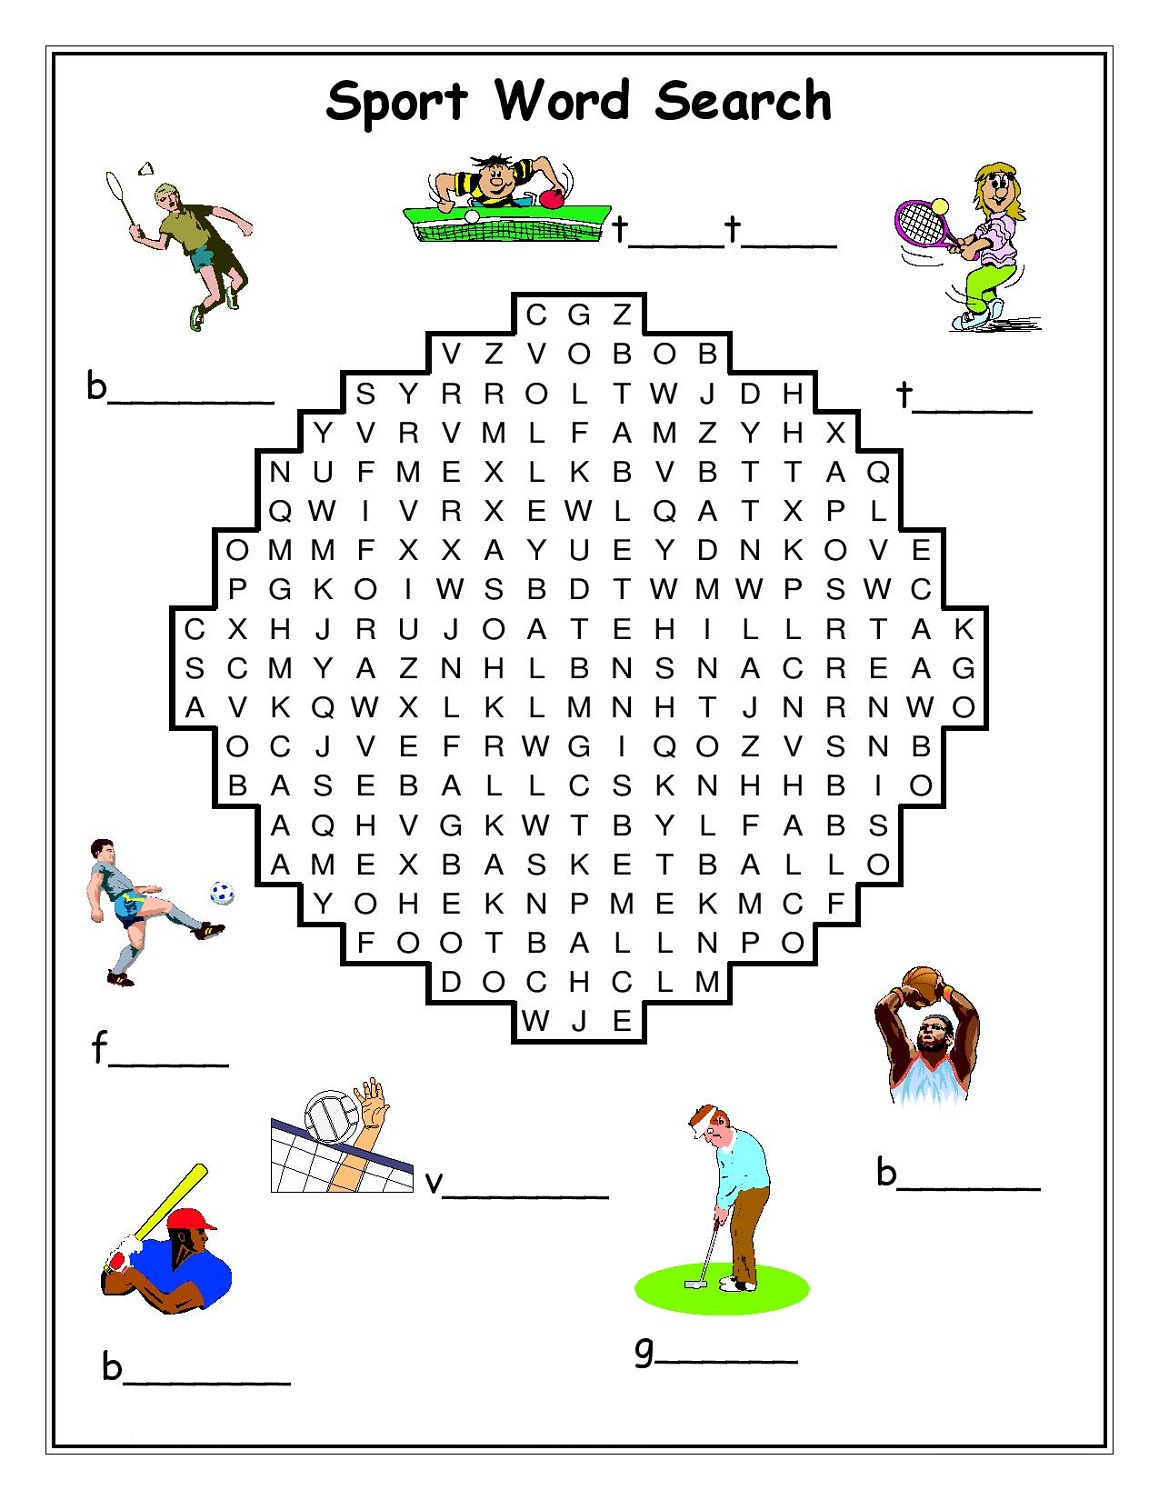 word-search-sports-pictures